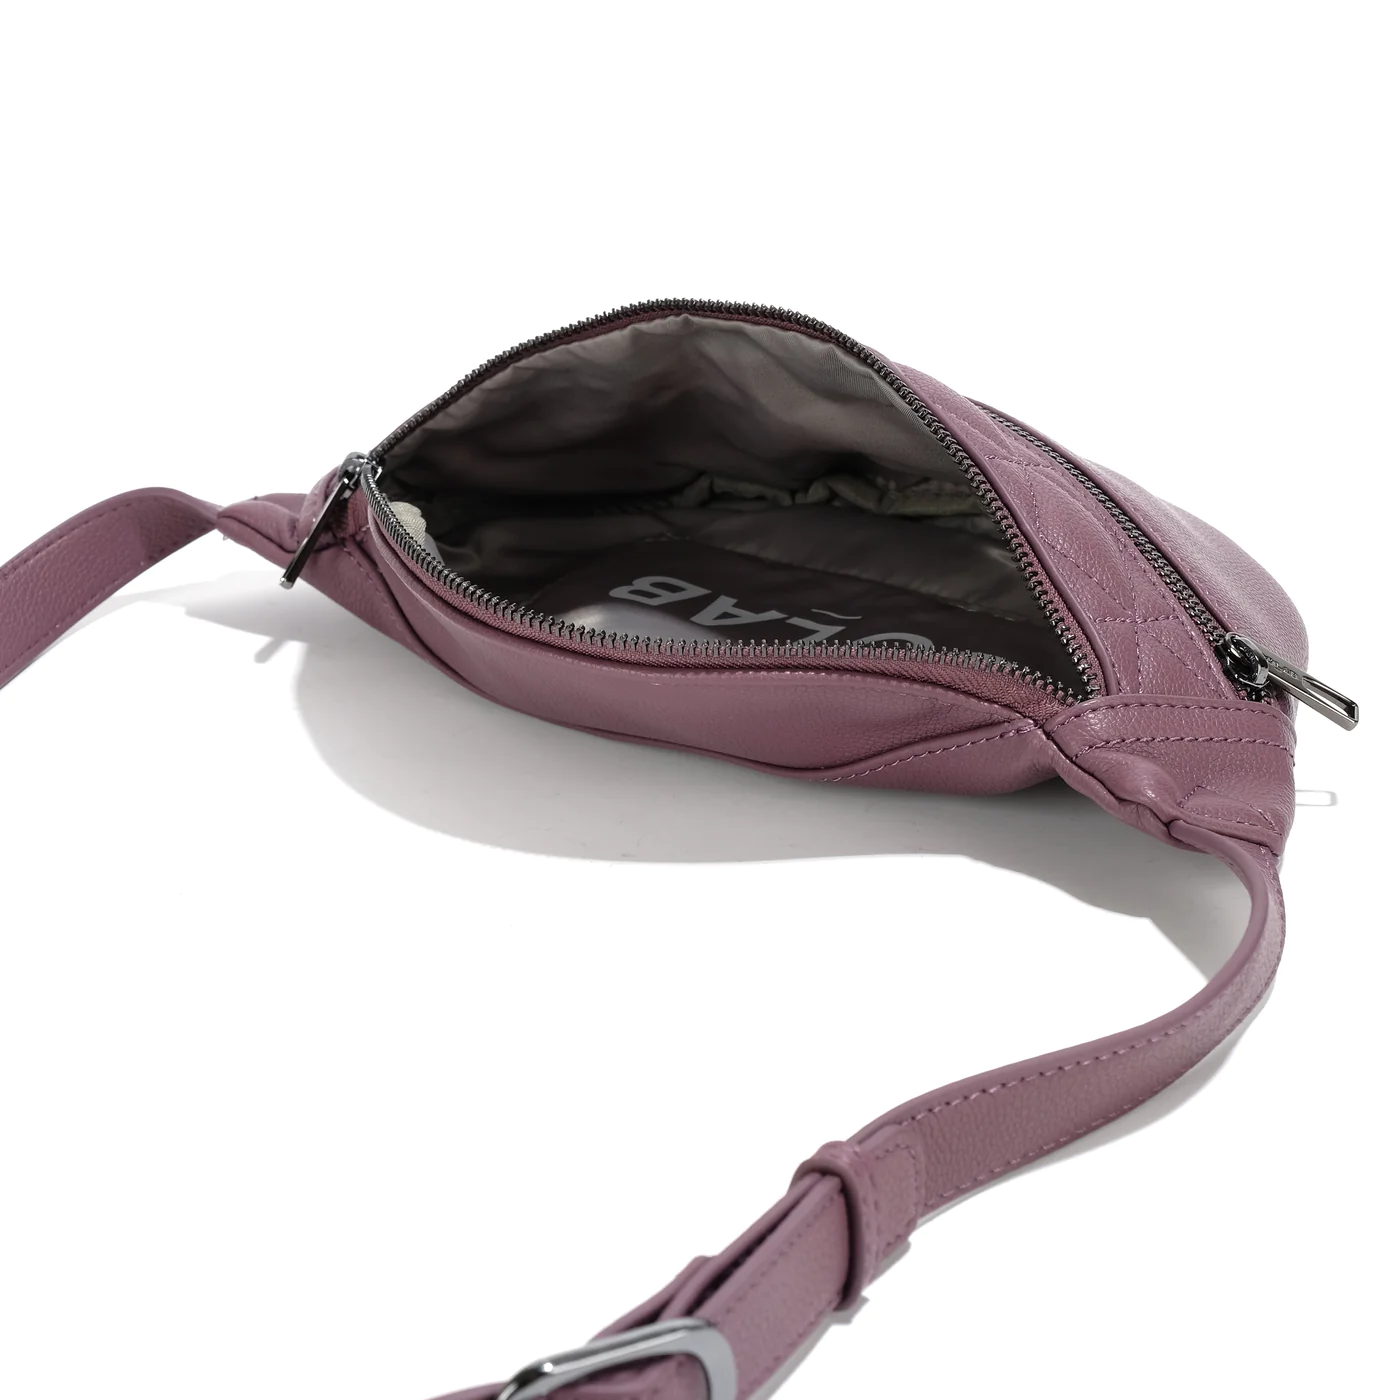 co-lab Ketti Sling - Maven Accessories - Other Accessories - Handbags & Wallets by co-lab | Grace the Boutique